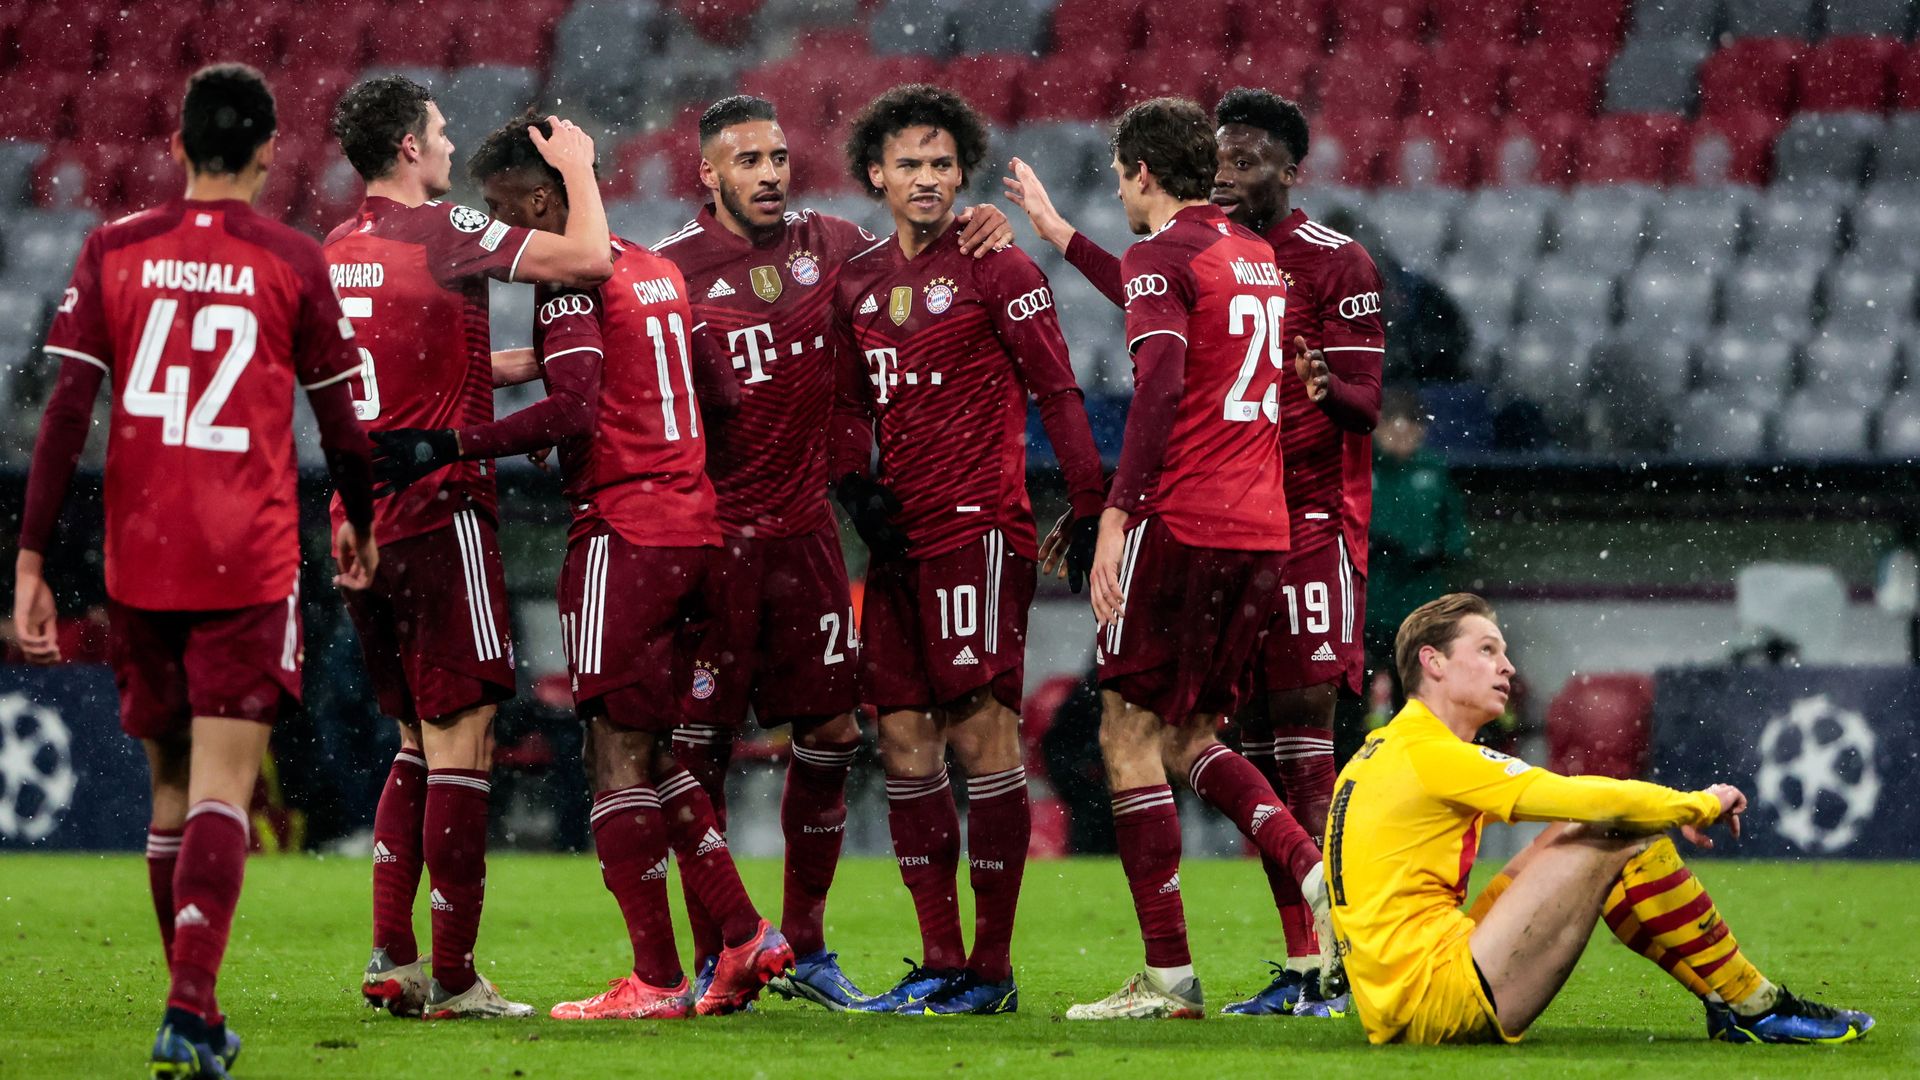 Leroy Sane 3rd R, up of Bayern Munich celebrates his scoring with teammates during a UEFA Champions League Group E match between Bayern Munich of Germany and FC Barcelona of Spain in Munich